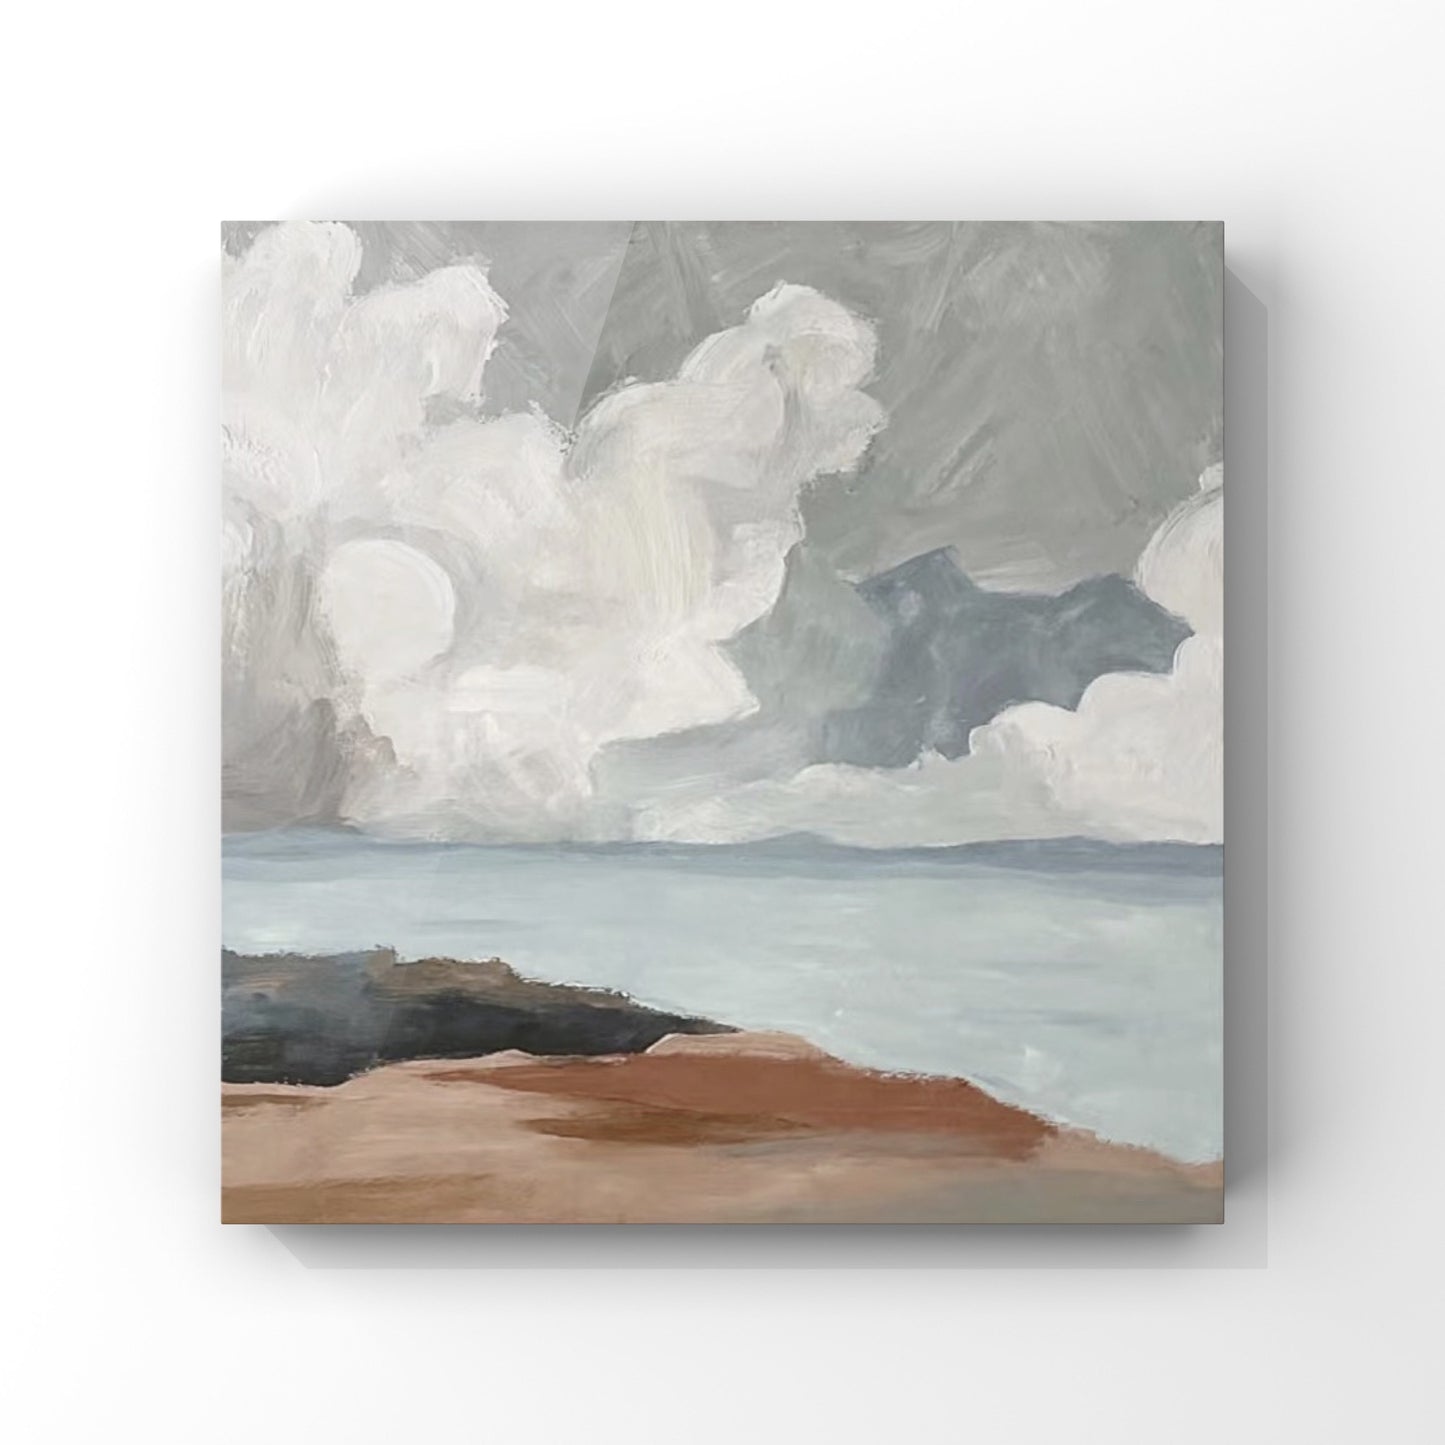 COASTAL, DARK CLOUDS AND SEA, HAND-PAINTED CANVAS